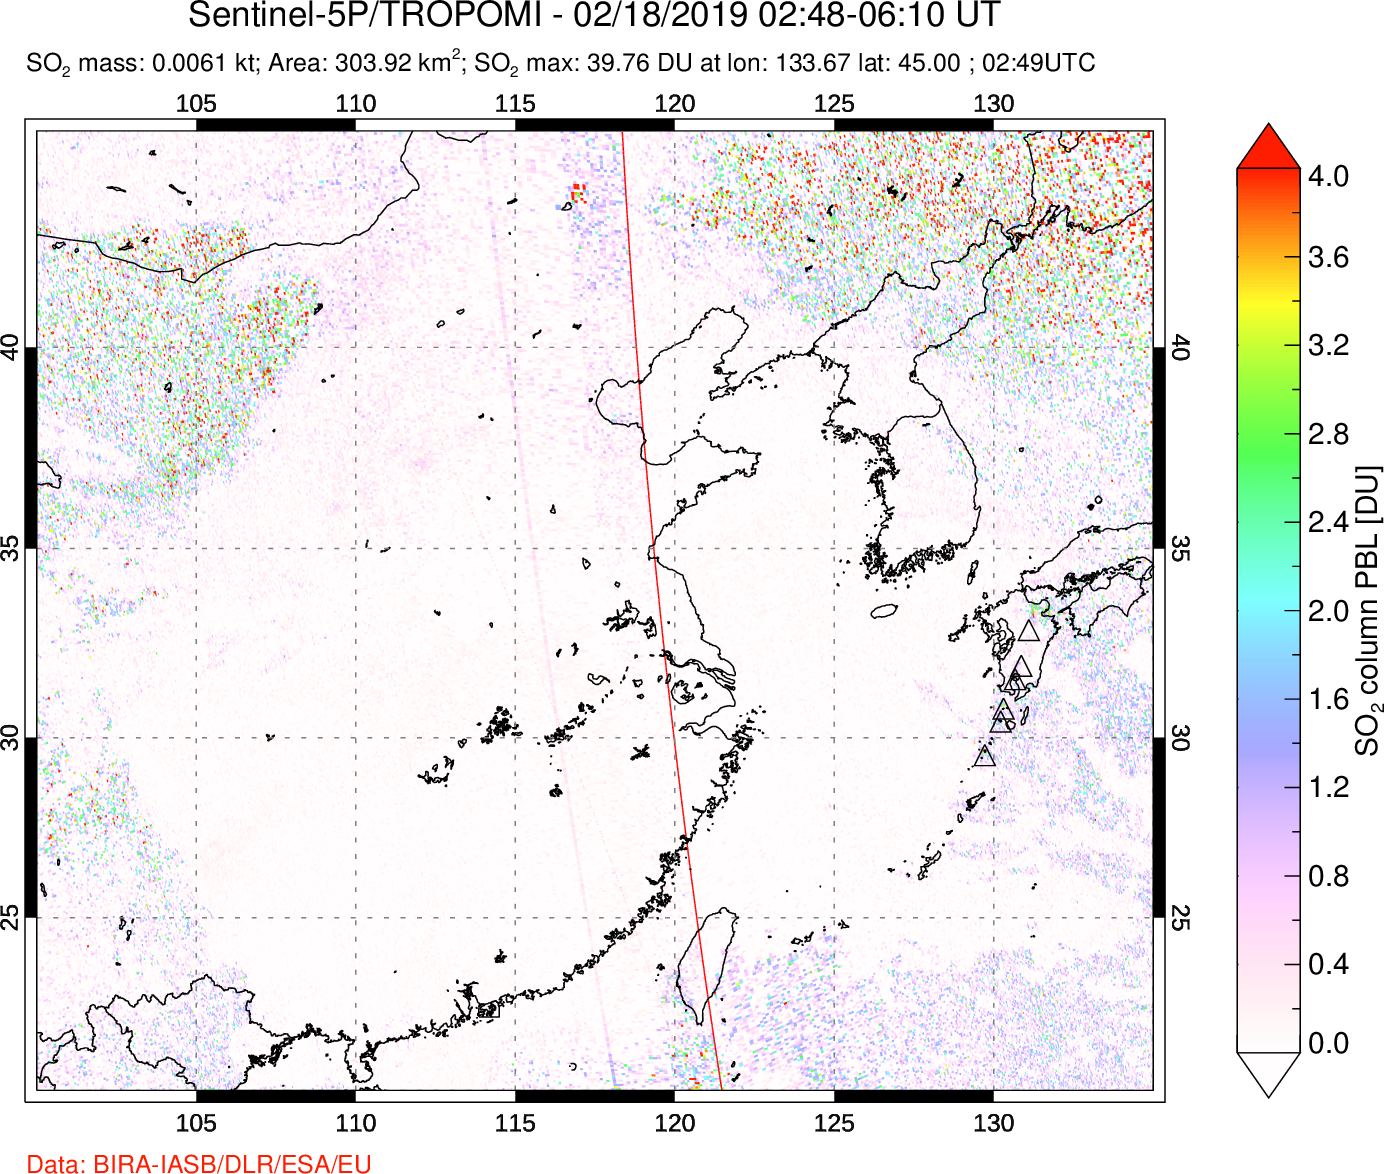 A sulfur dioxide image over Eastern China on Feb 18, 2019.